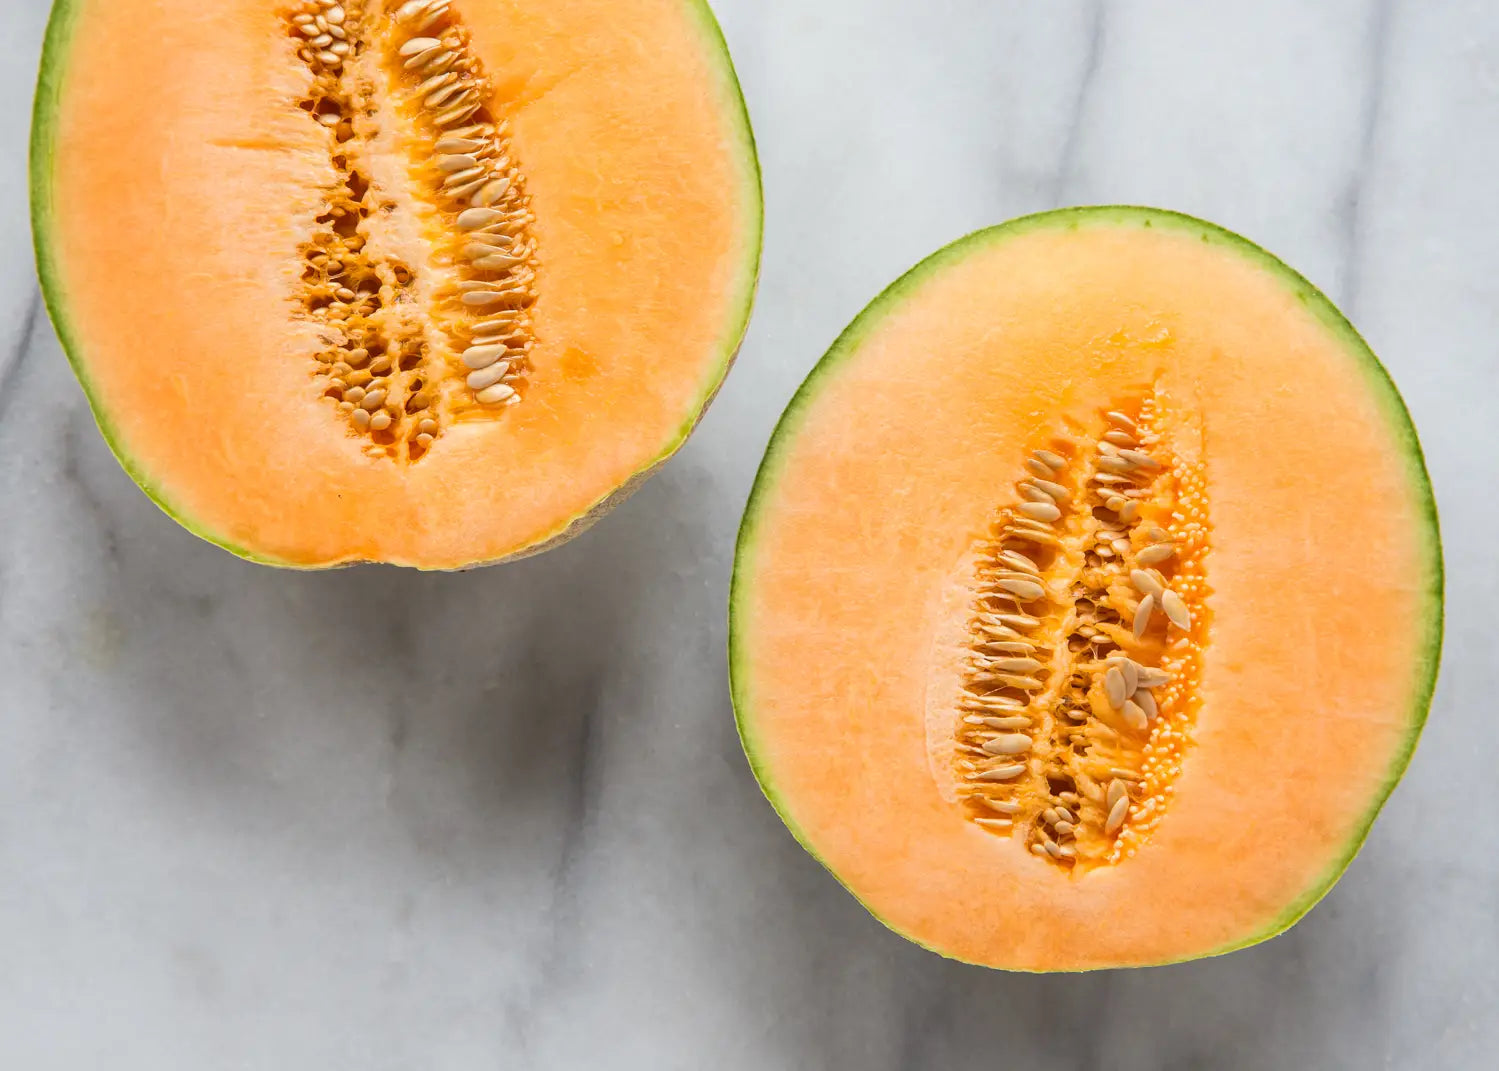 How to prepare fresh cantaloupe seeds for planting - All tips you need to know